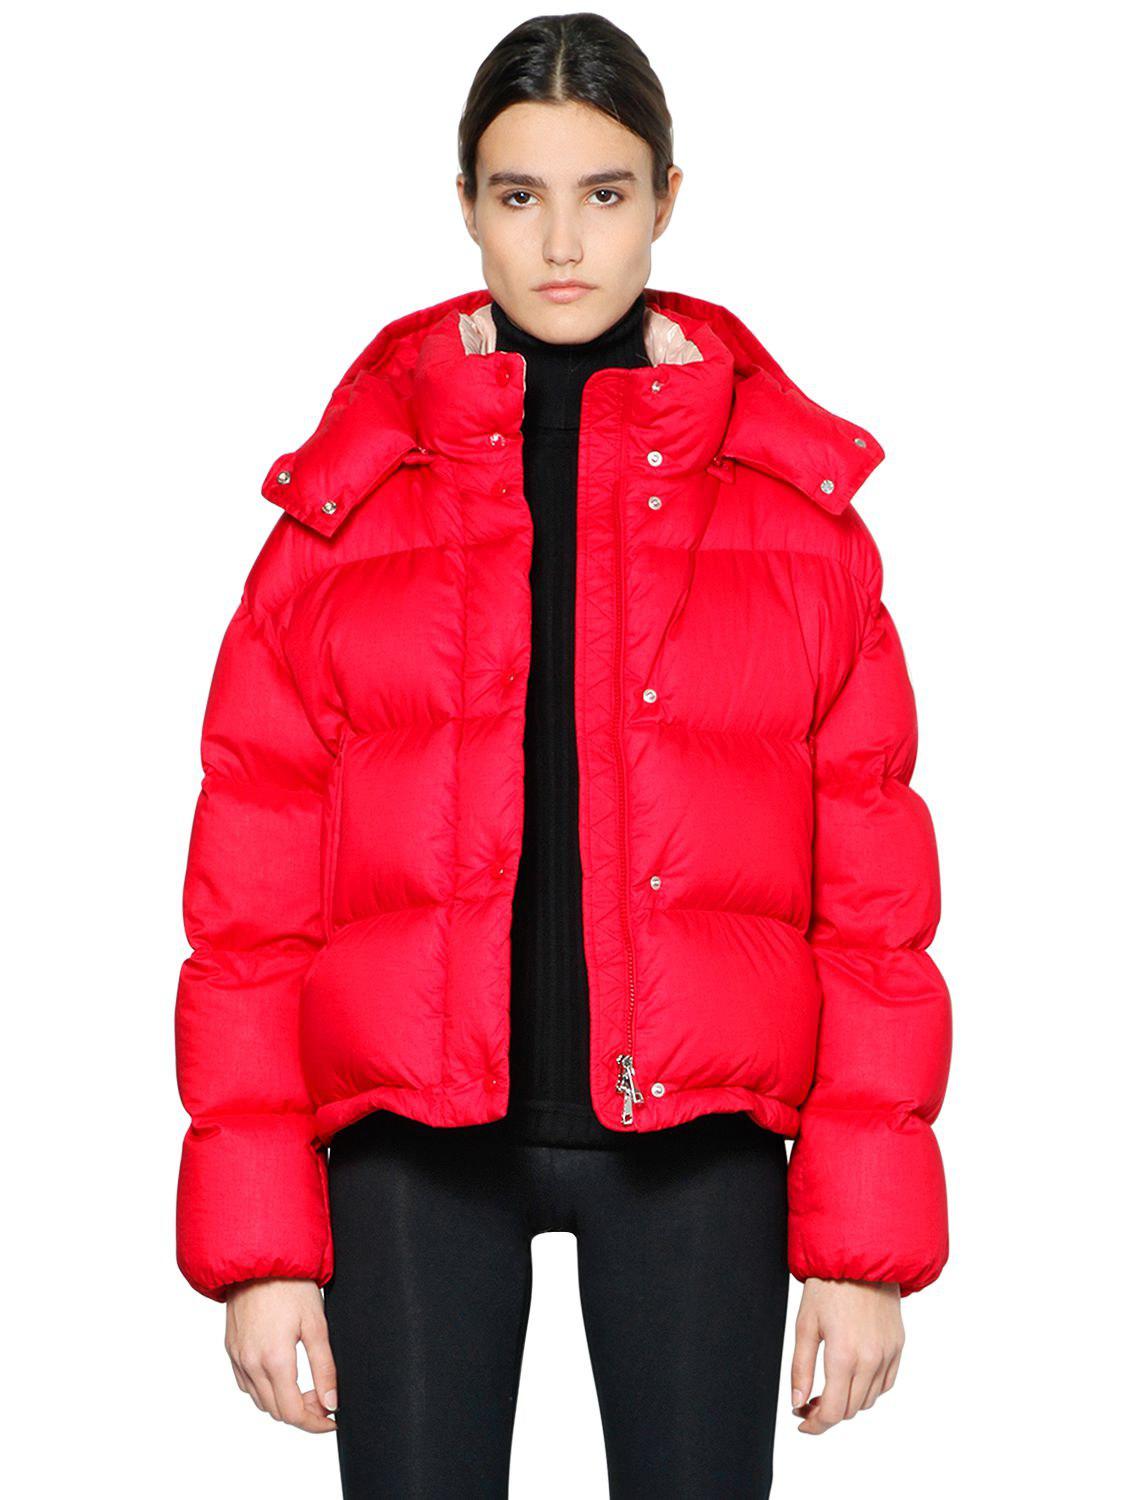 Moncler Paeonia Cotton Parachute Down Jacket in Red - Lyst